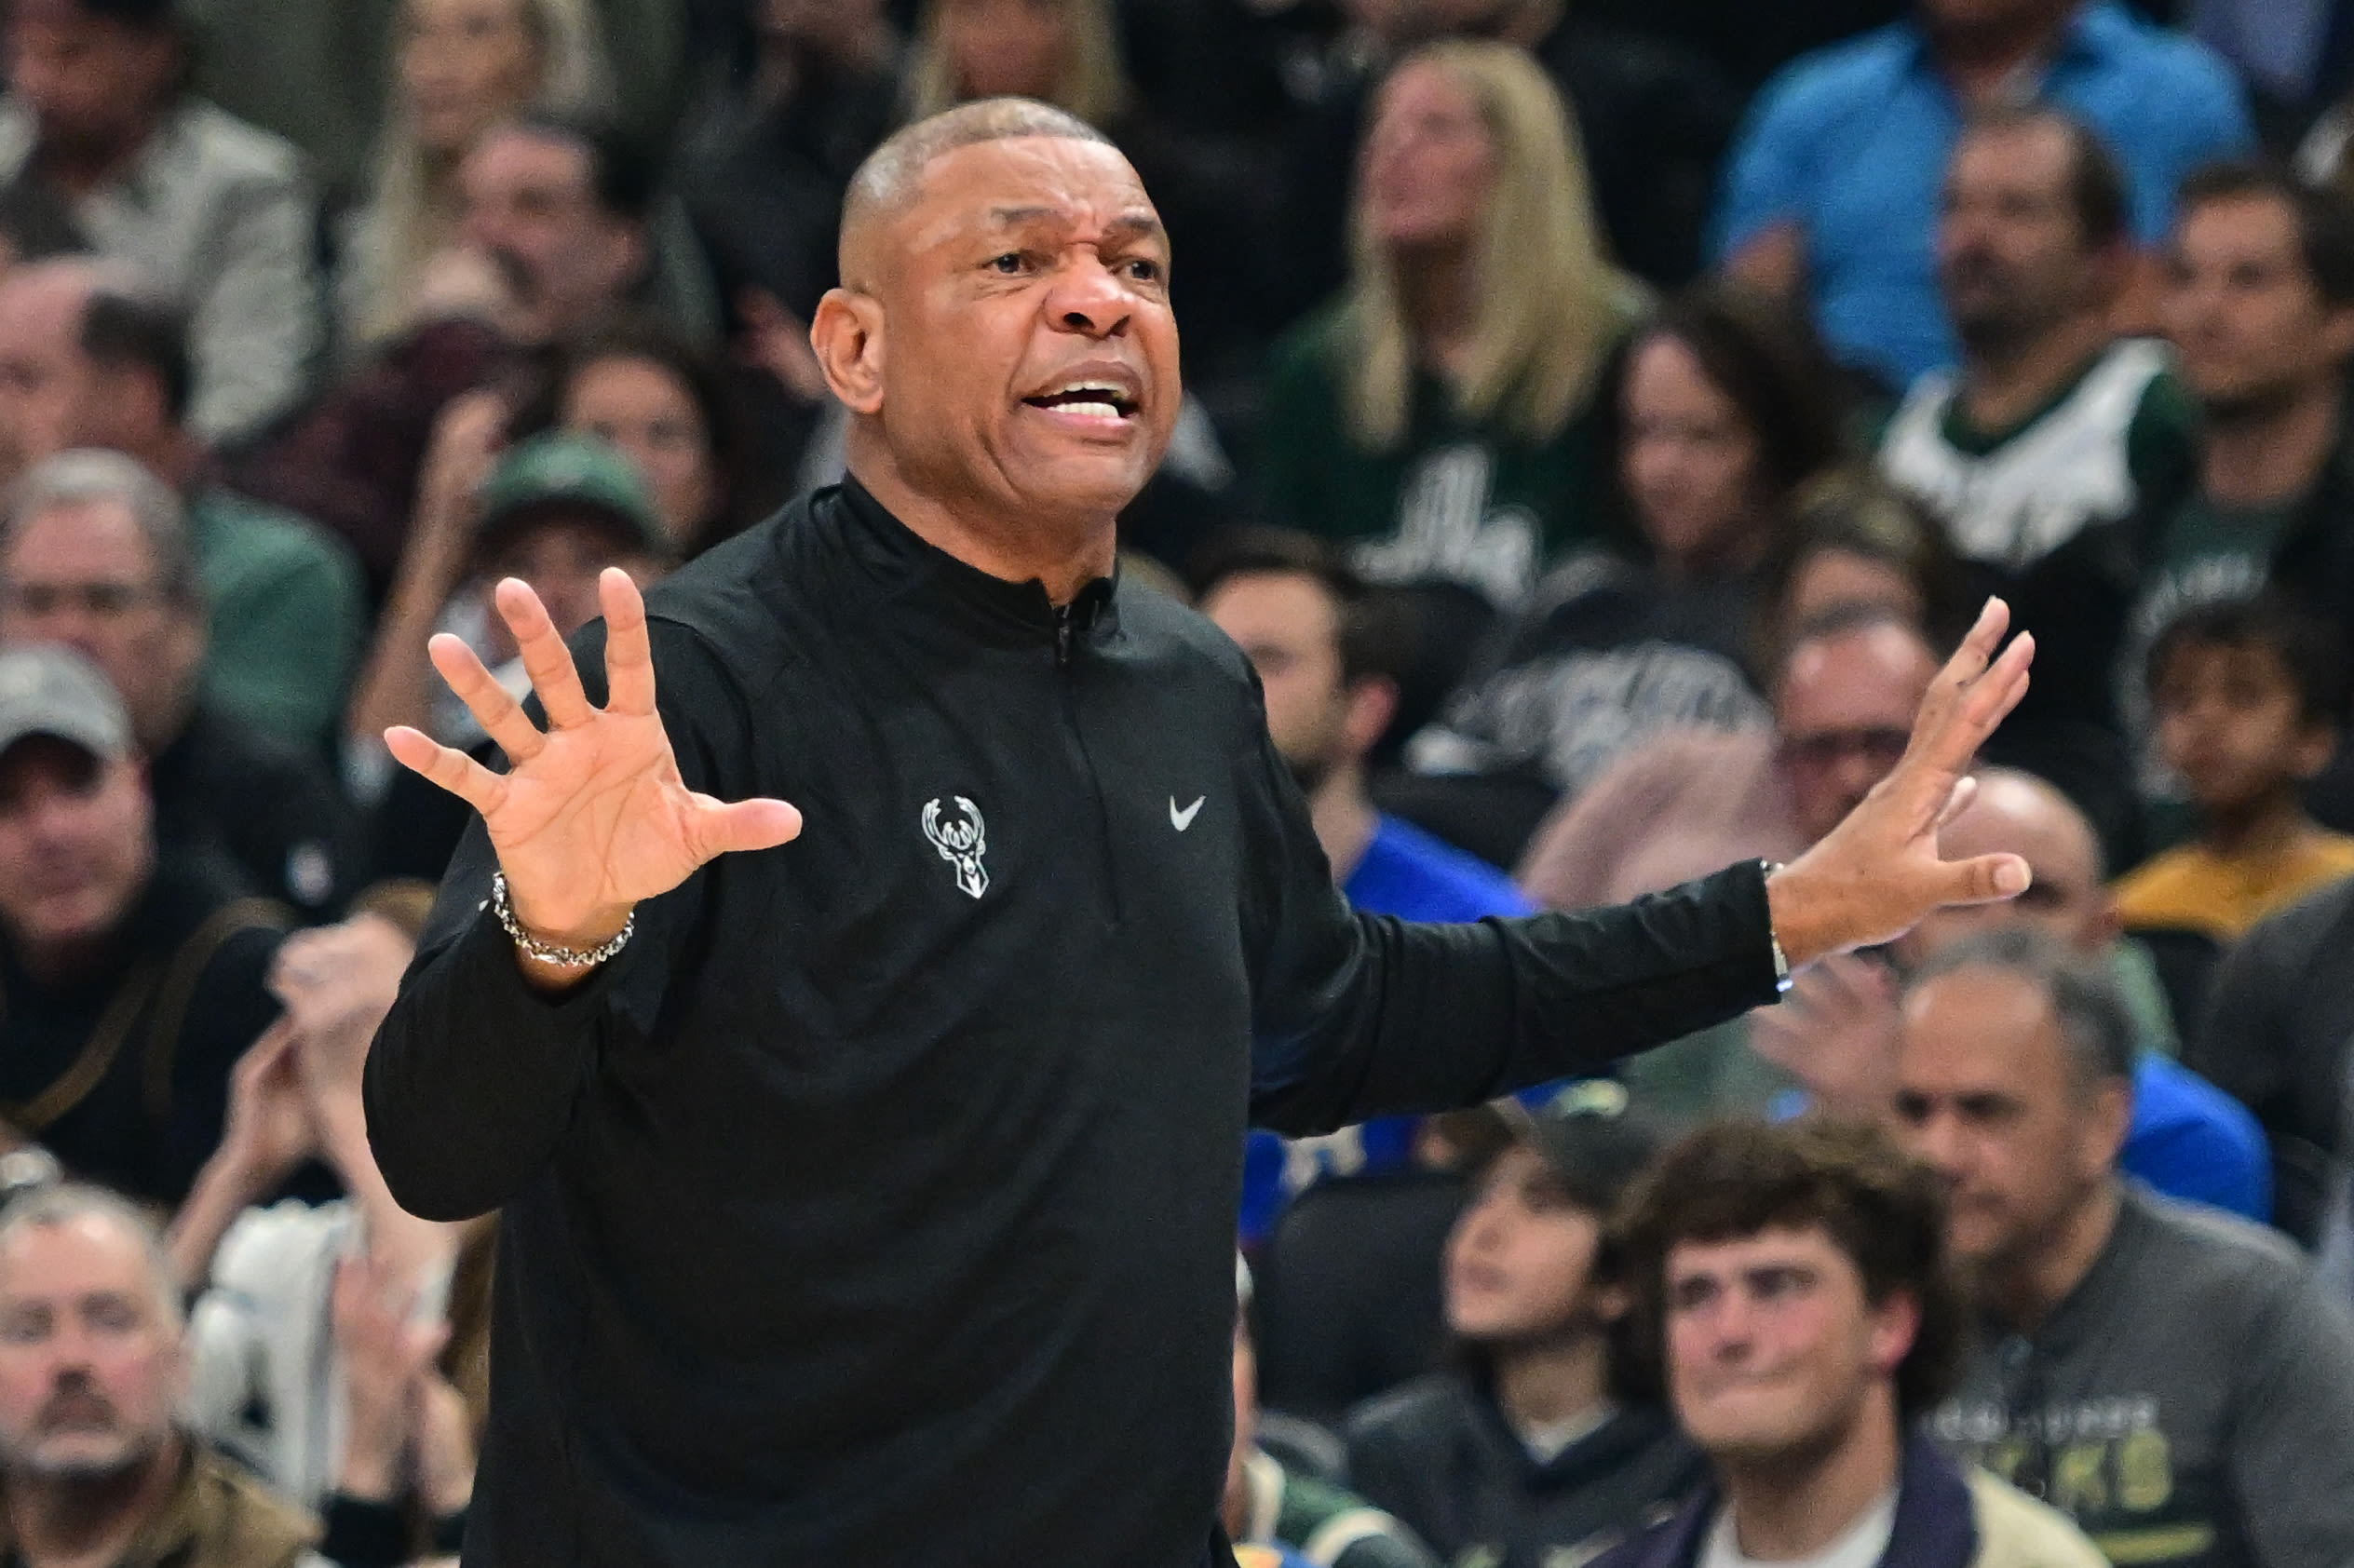 Former Sixers coach Doc Rivers fires back at JJ Redick’s comments